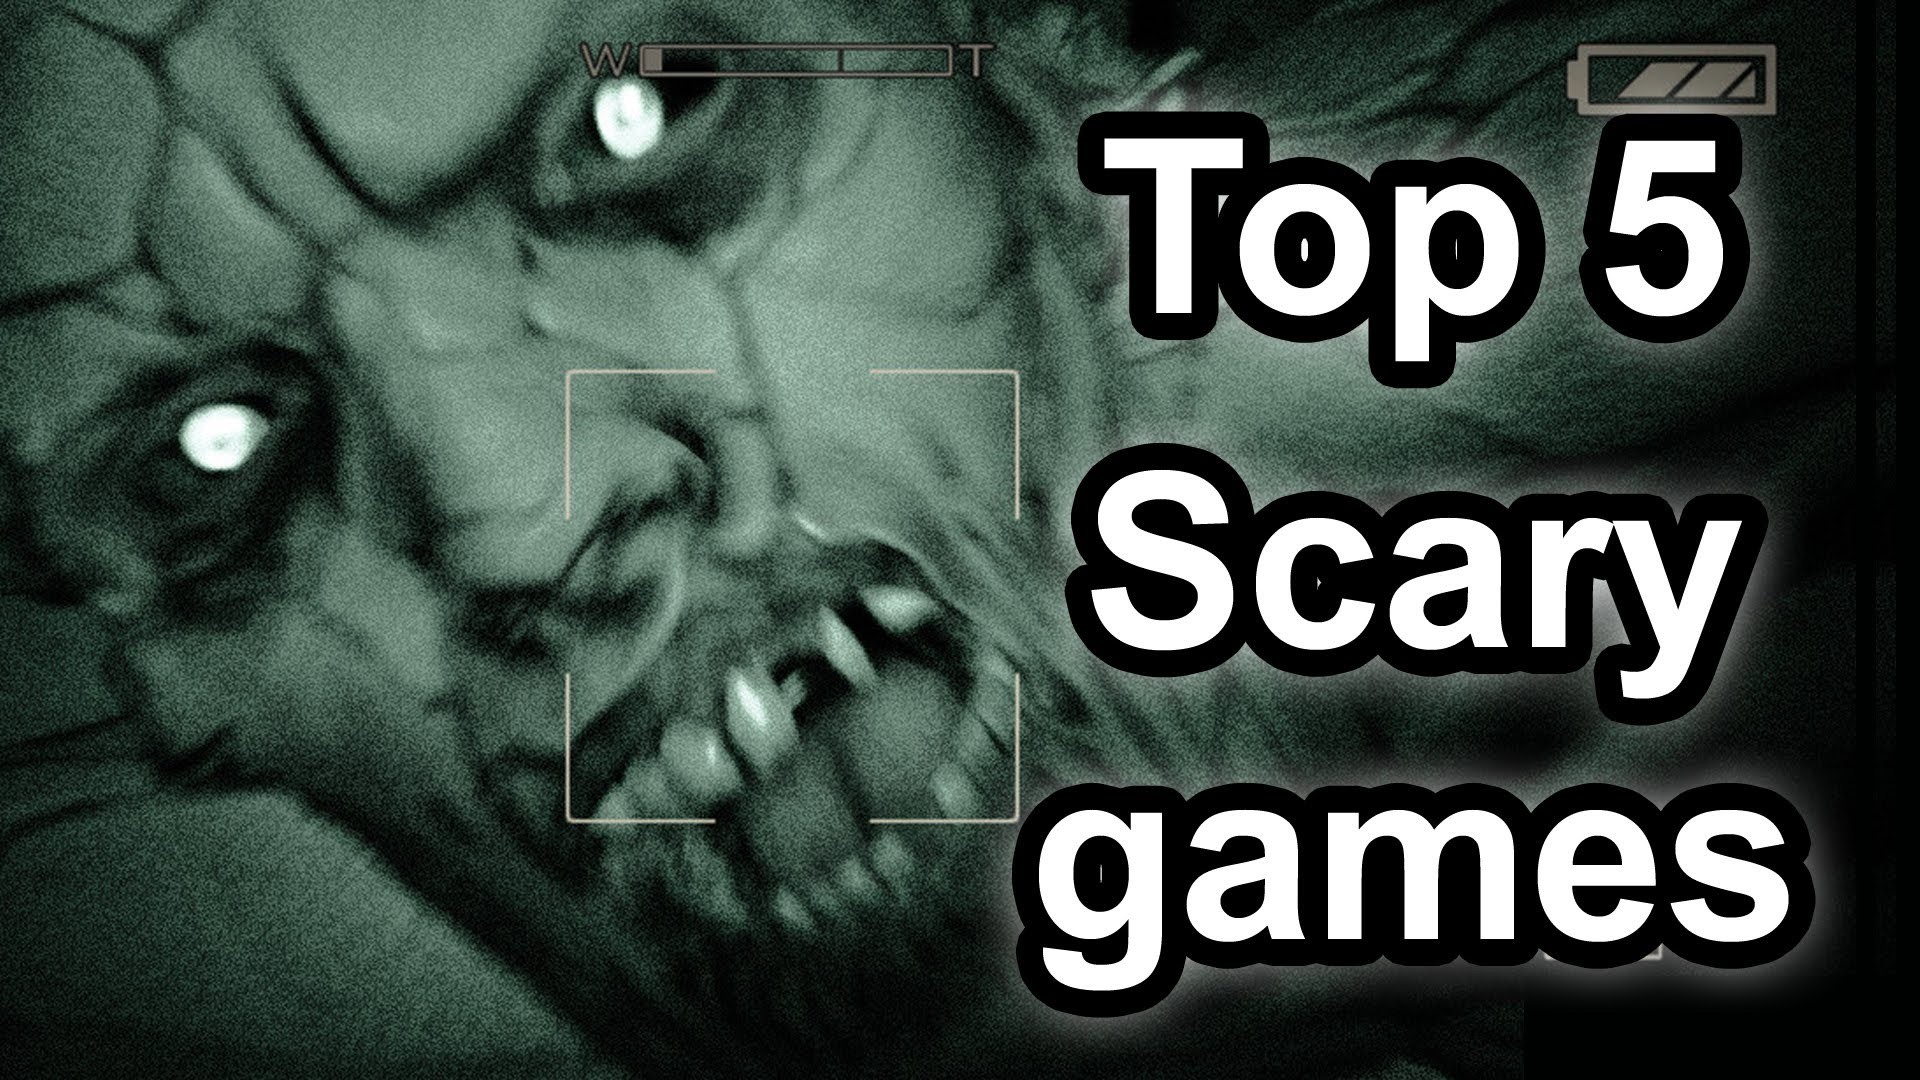 Top 5 scary gaming pc games